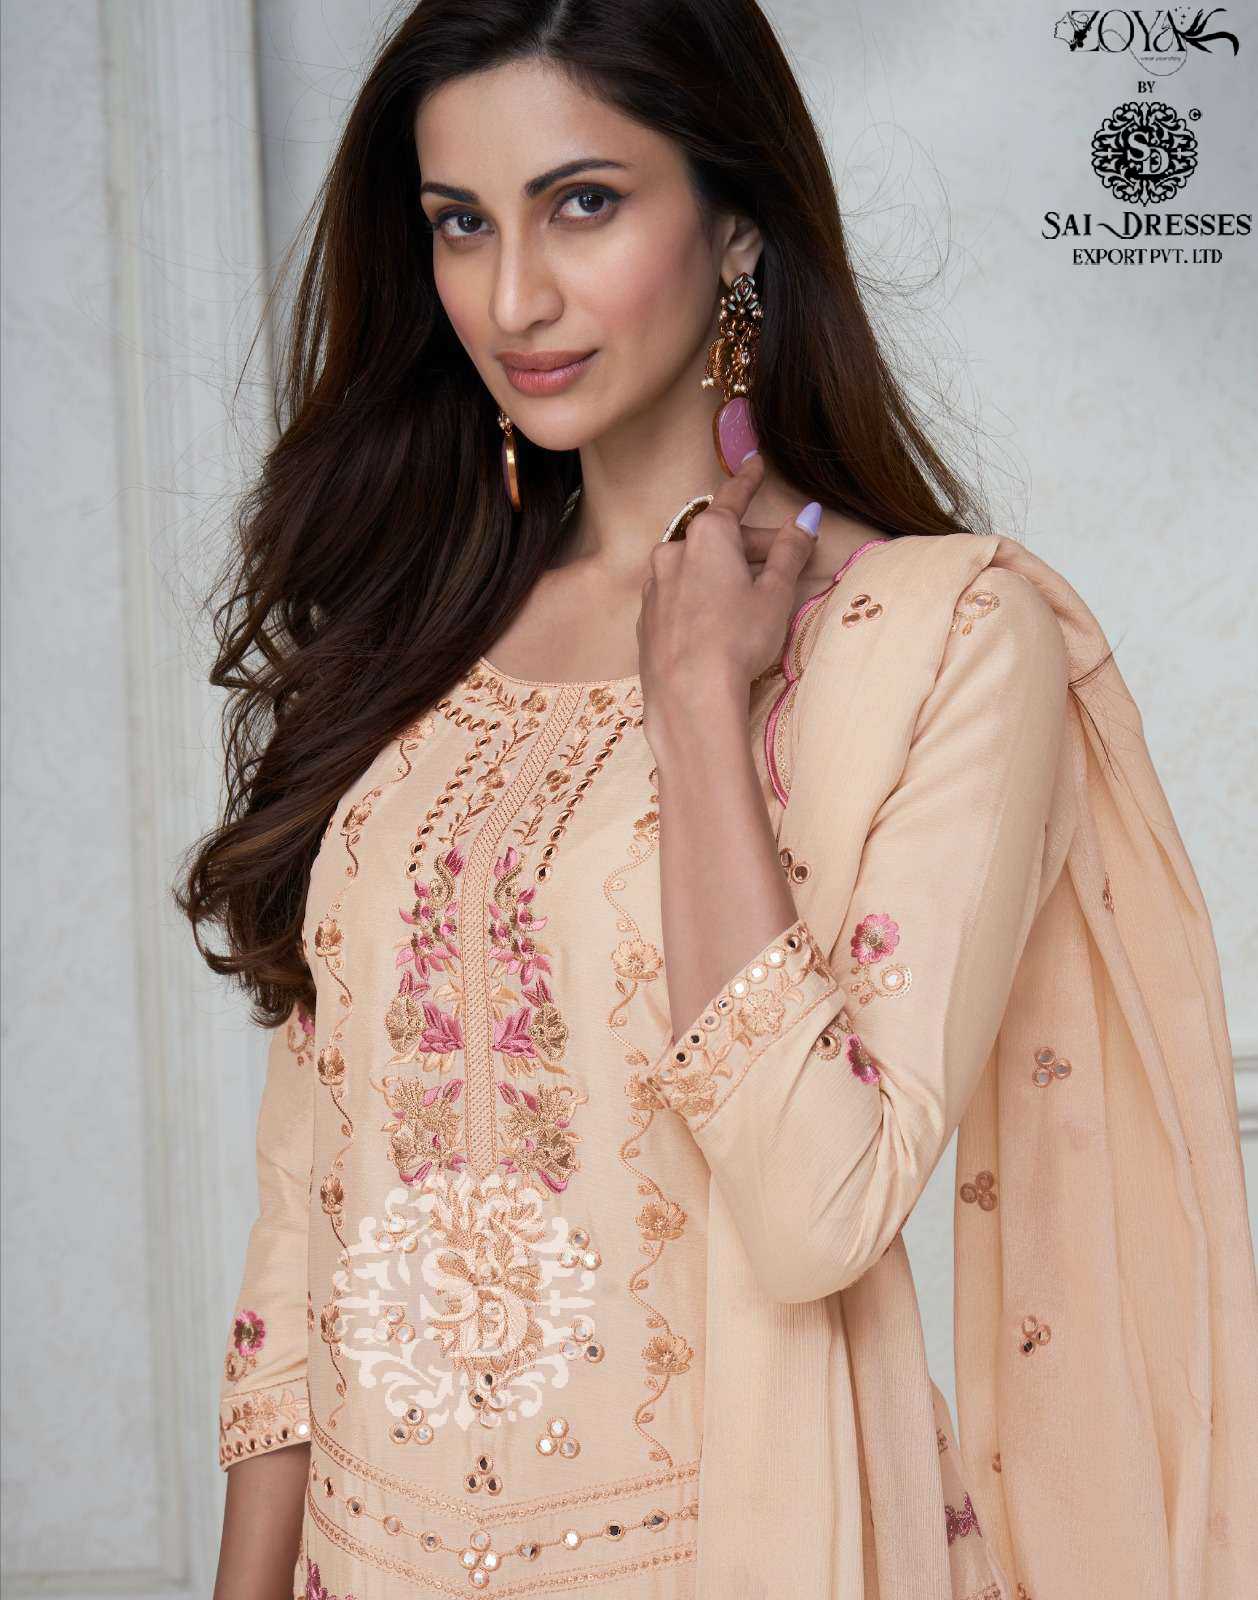 AGHA NOOR PARTY WEAR DESIGNER SUITS IN WHOLESALE RATE IN SURAT